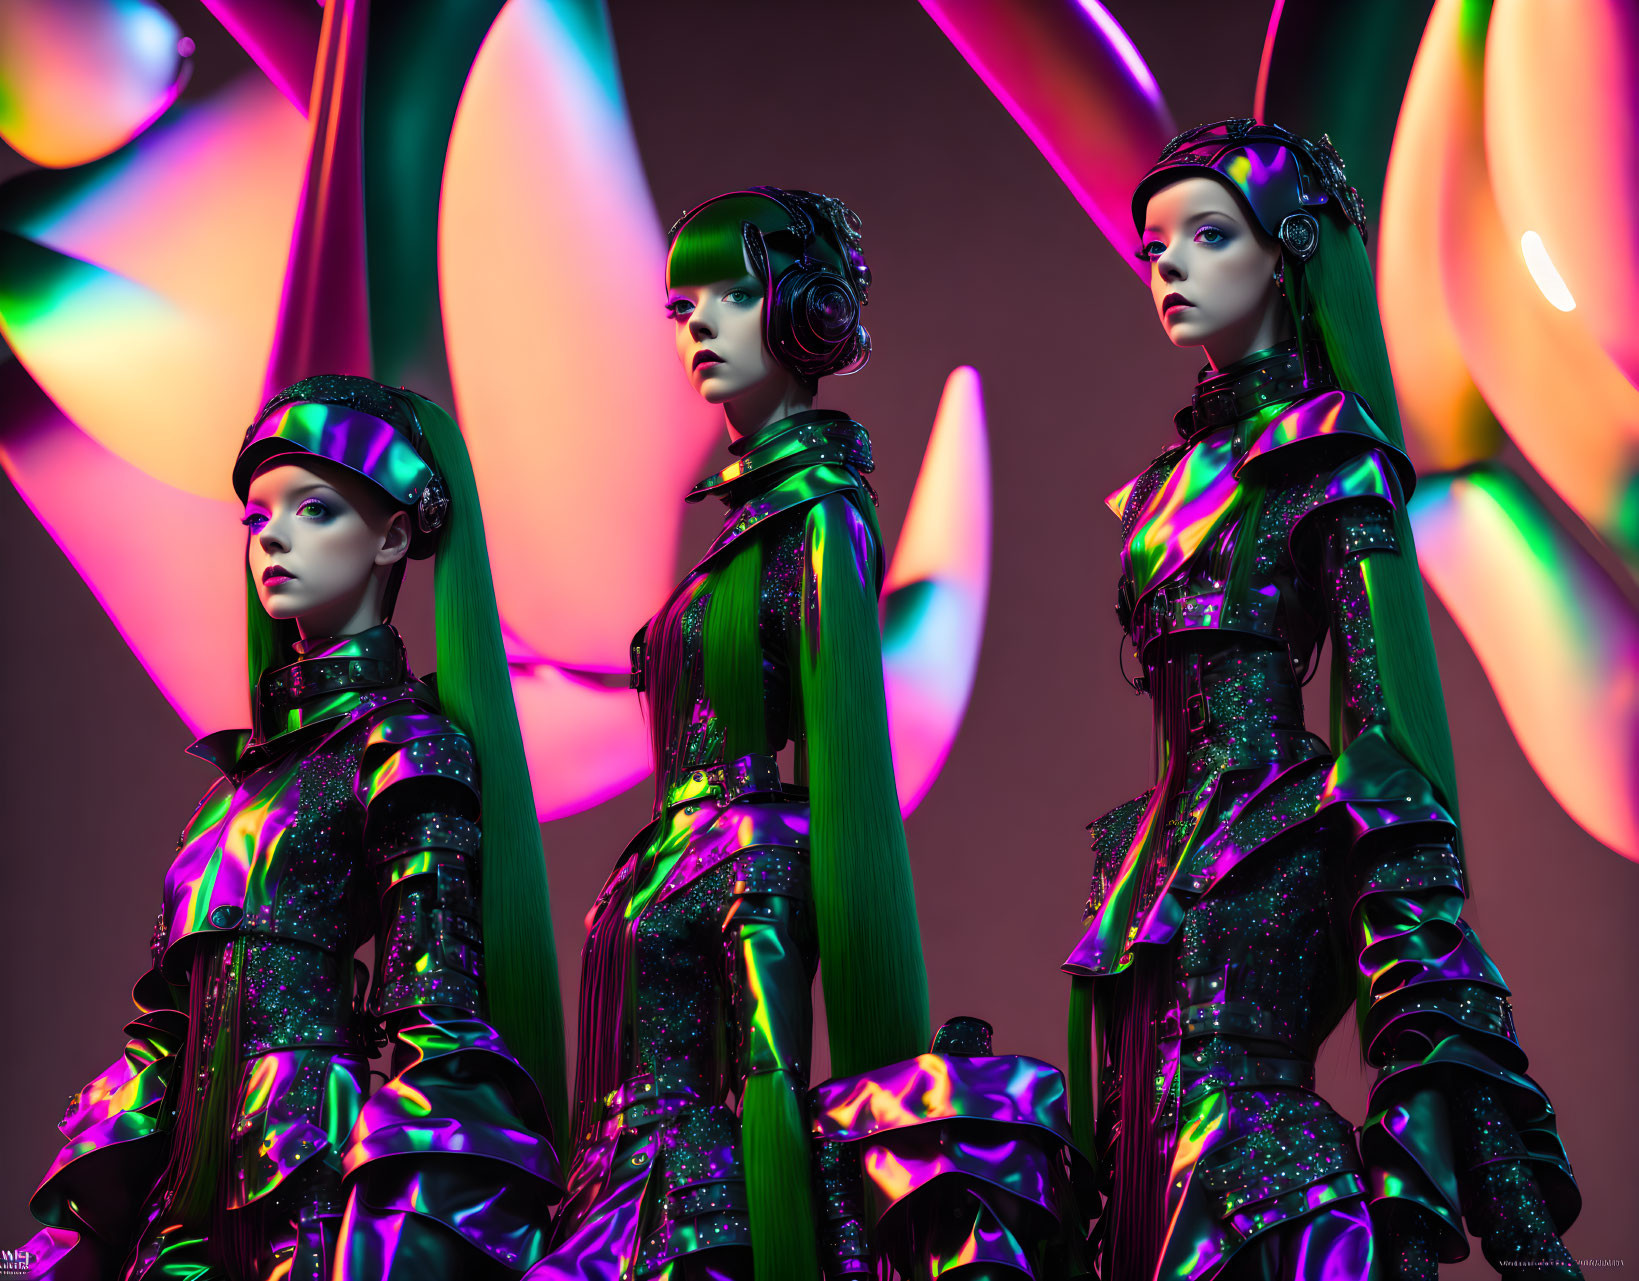 Three futuristic female figures in iridescent outfits with headsets against abstract background.